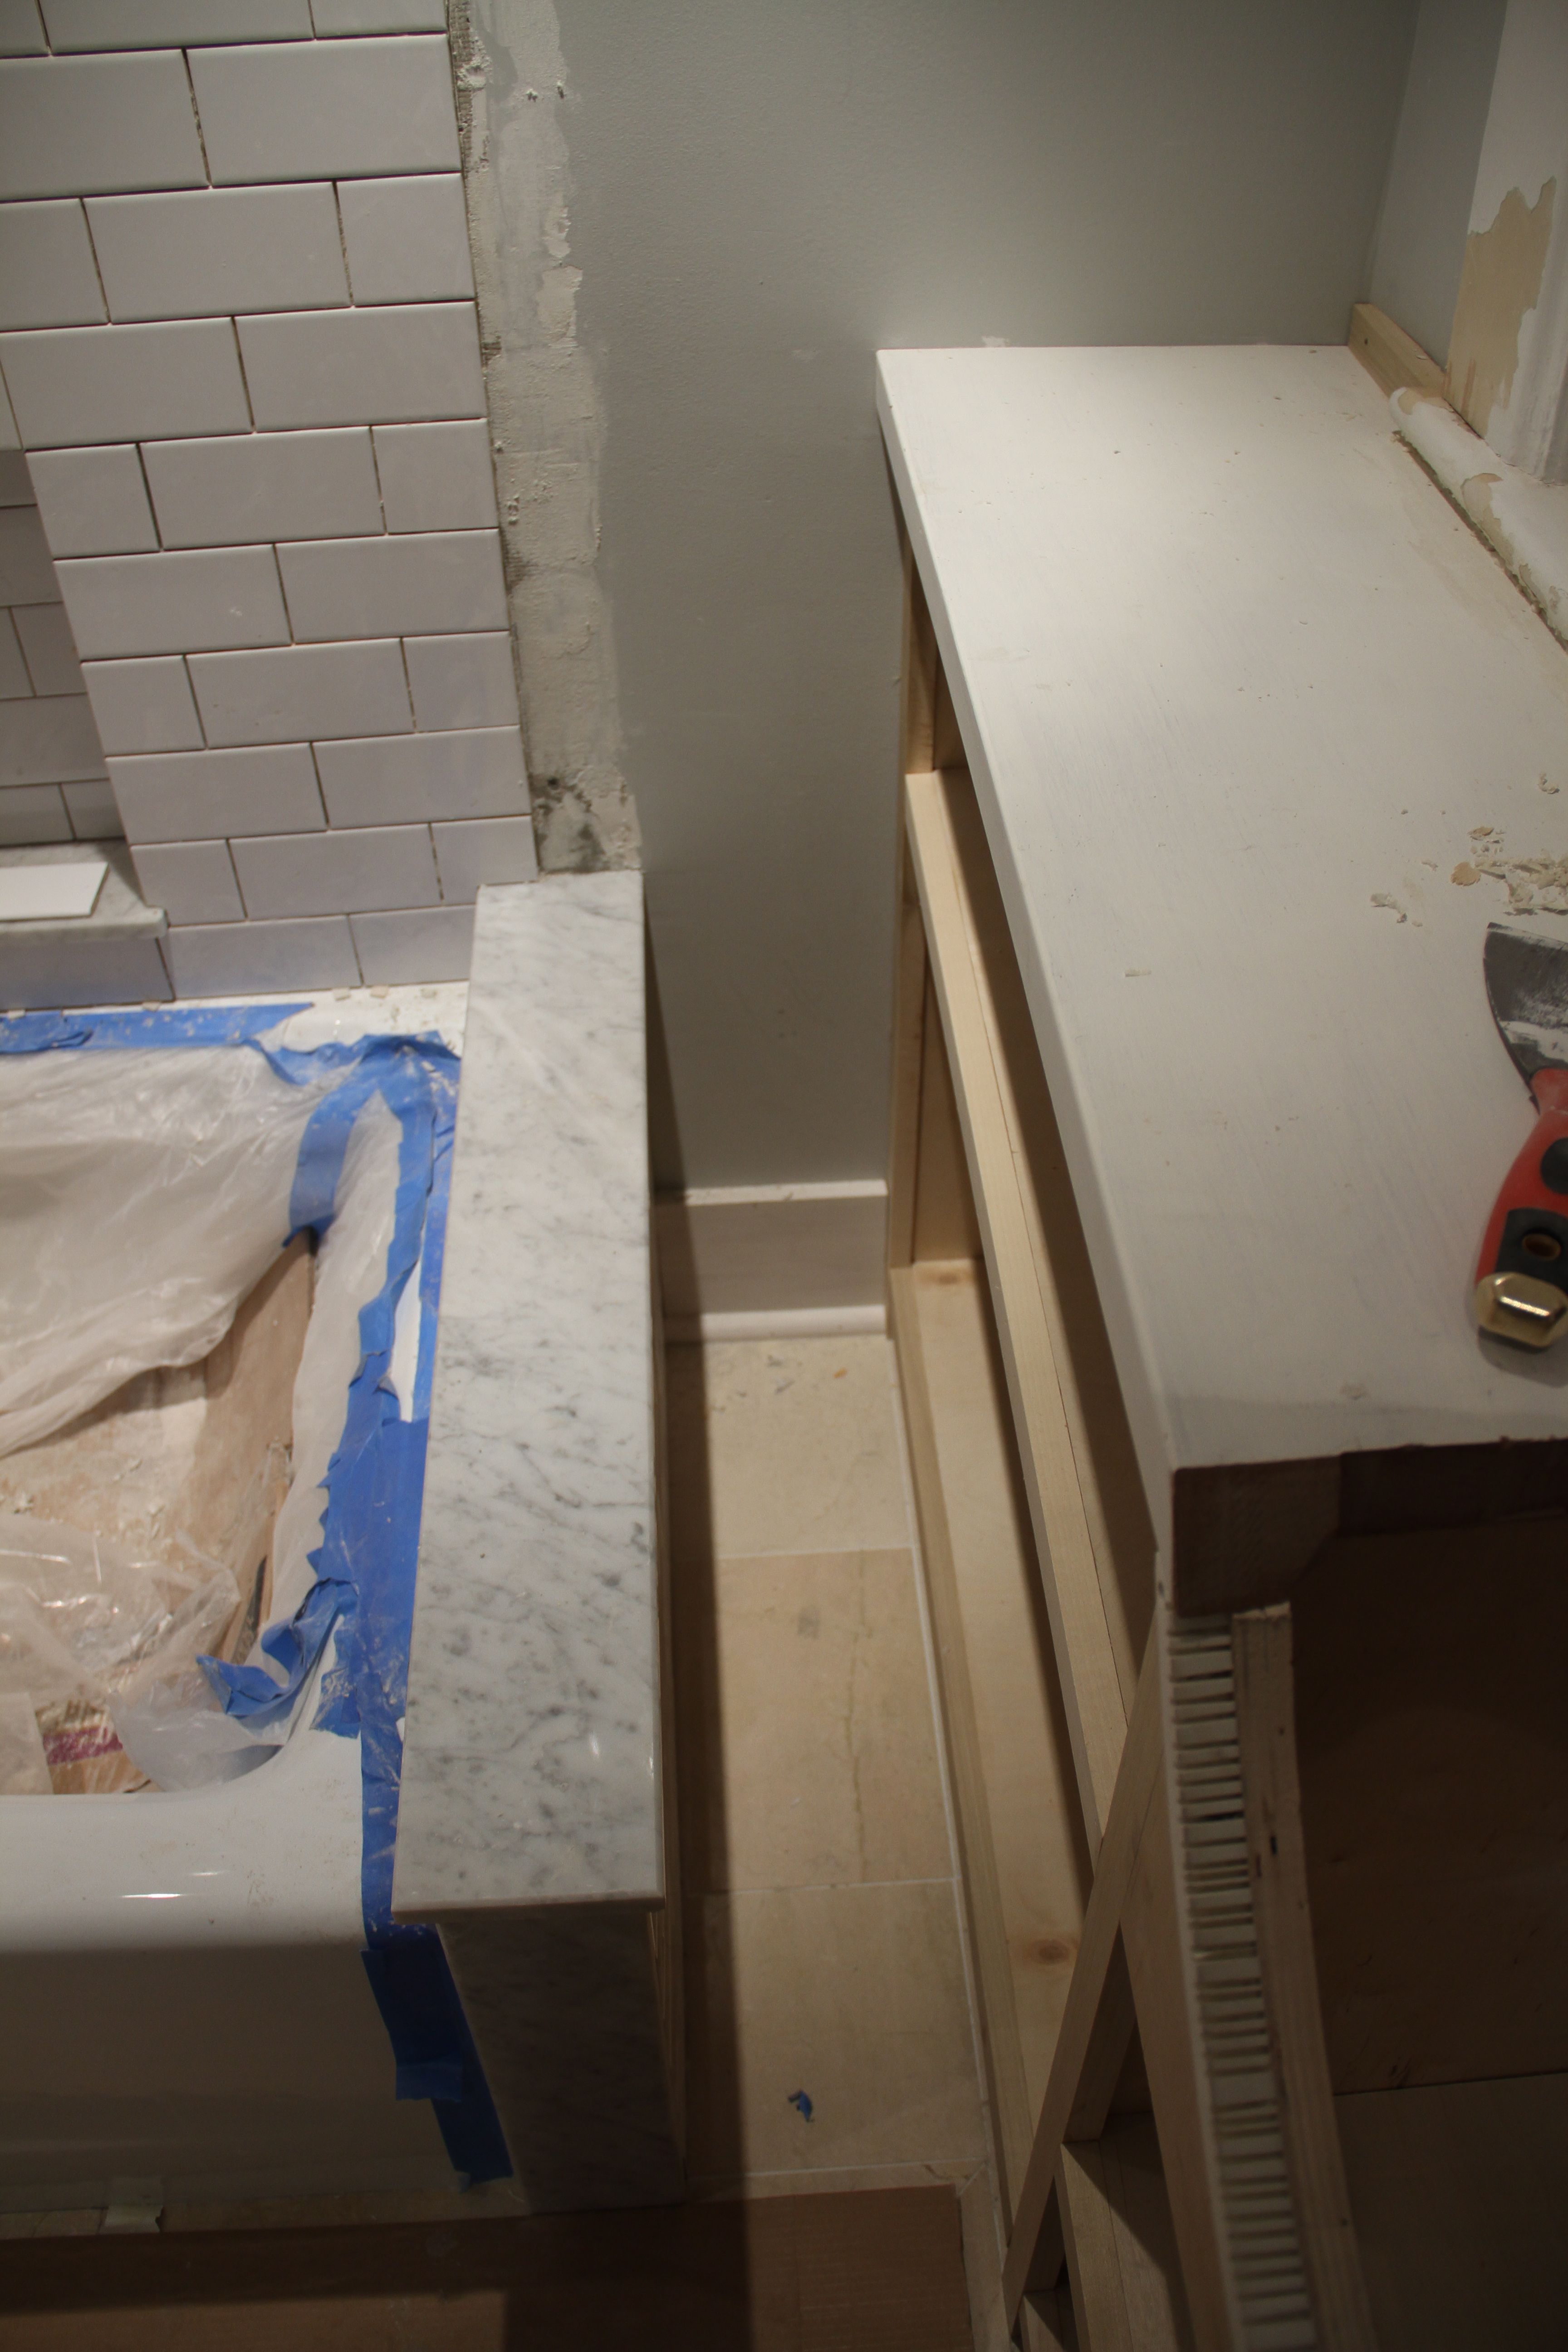 Even that little bit of wall needed baseboard. The shower curtain will fit nicely in that little slot.